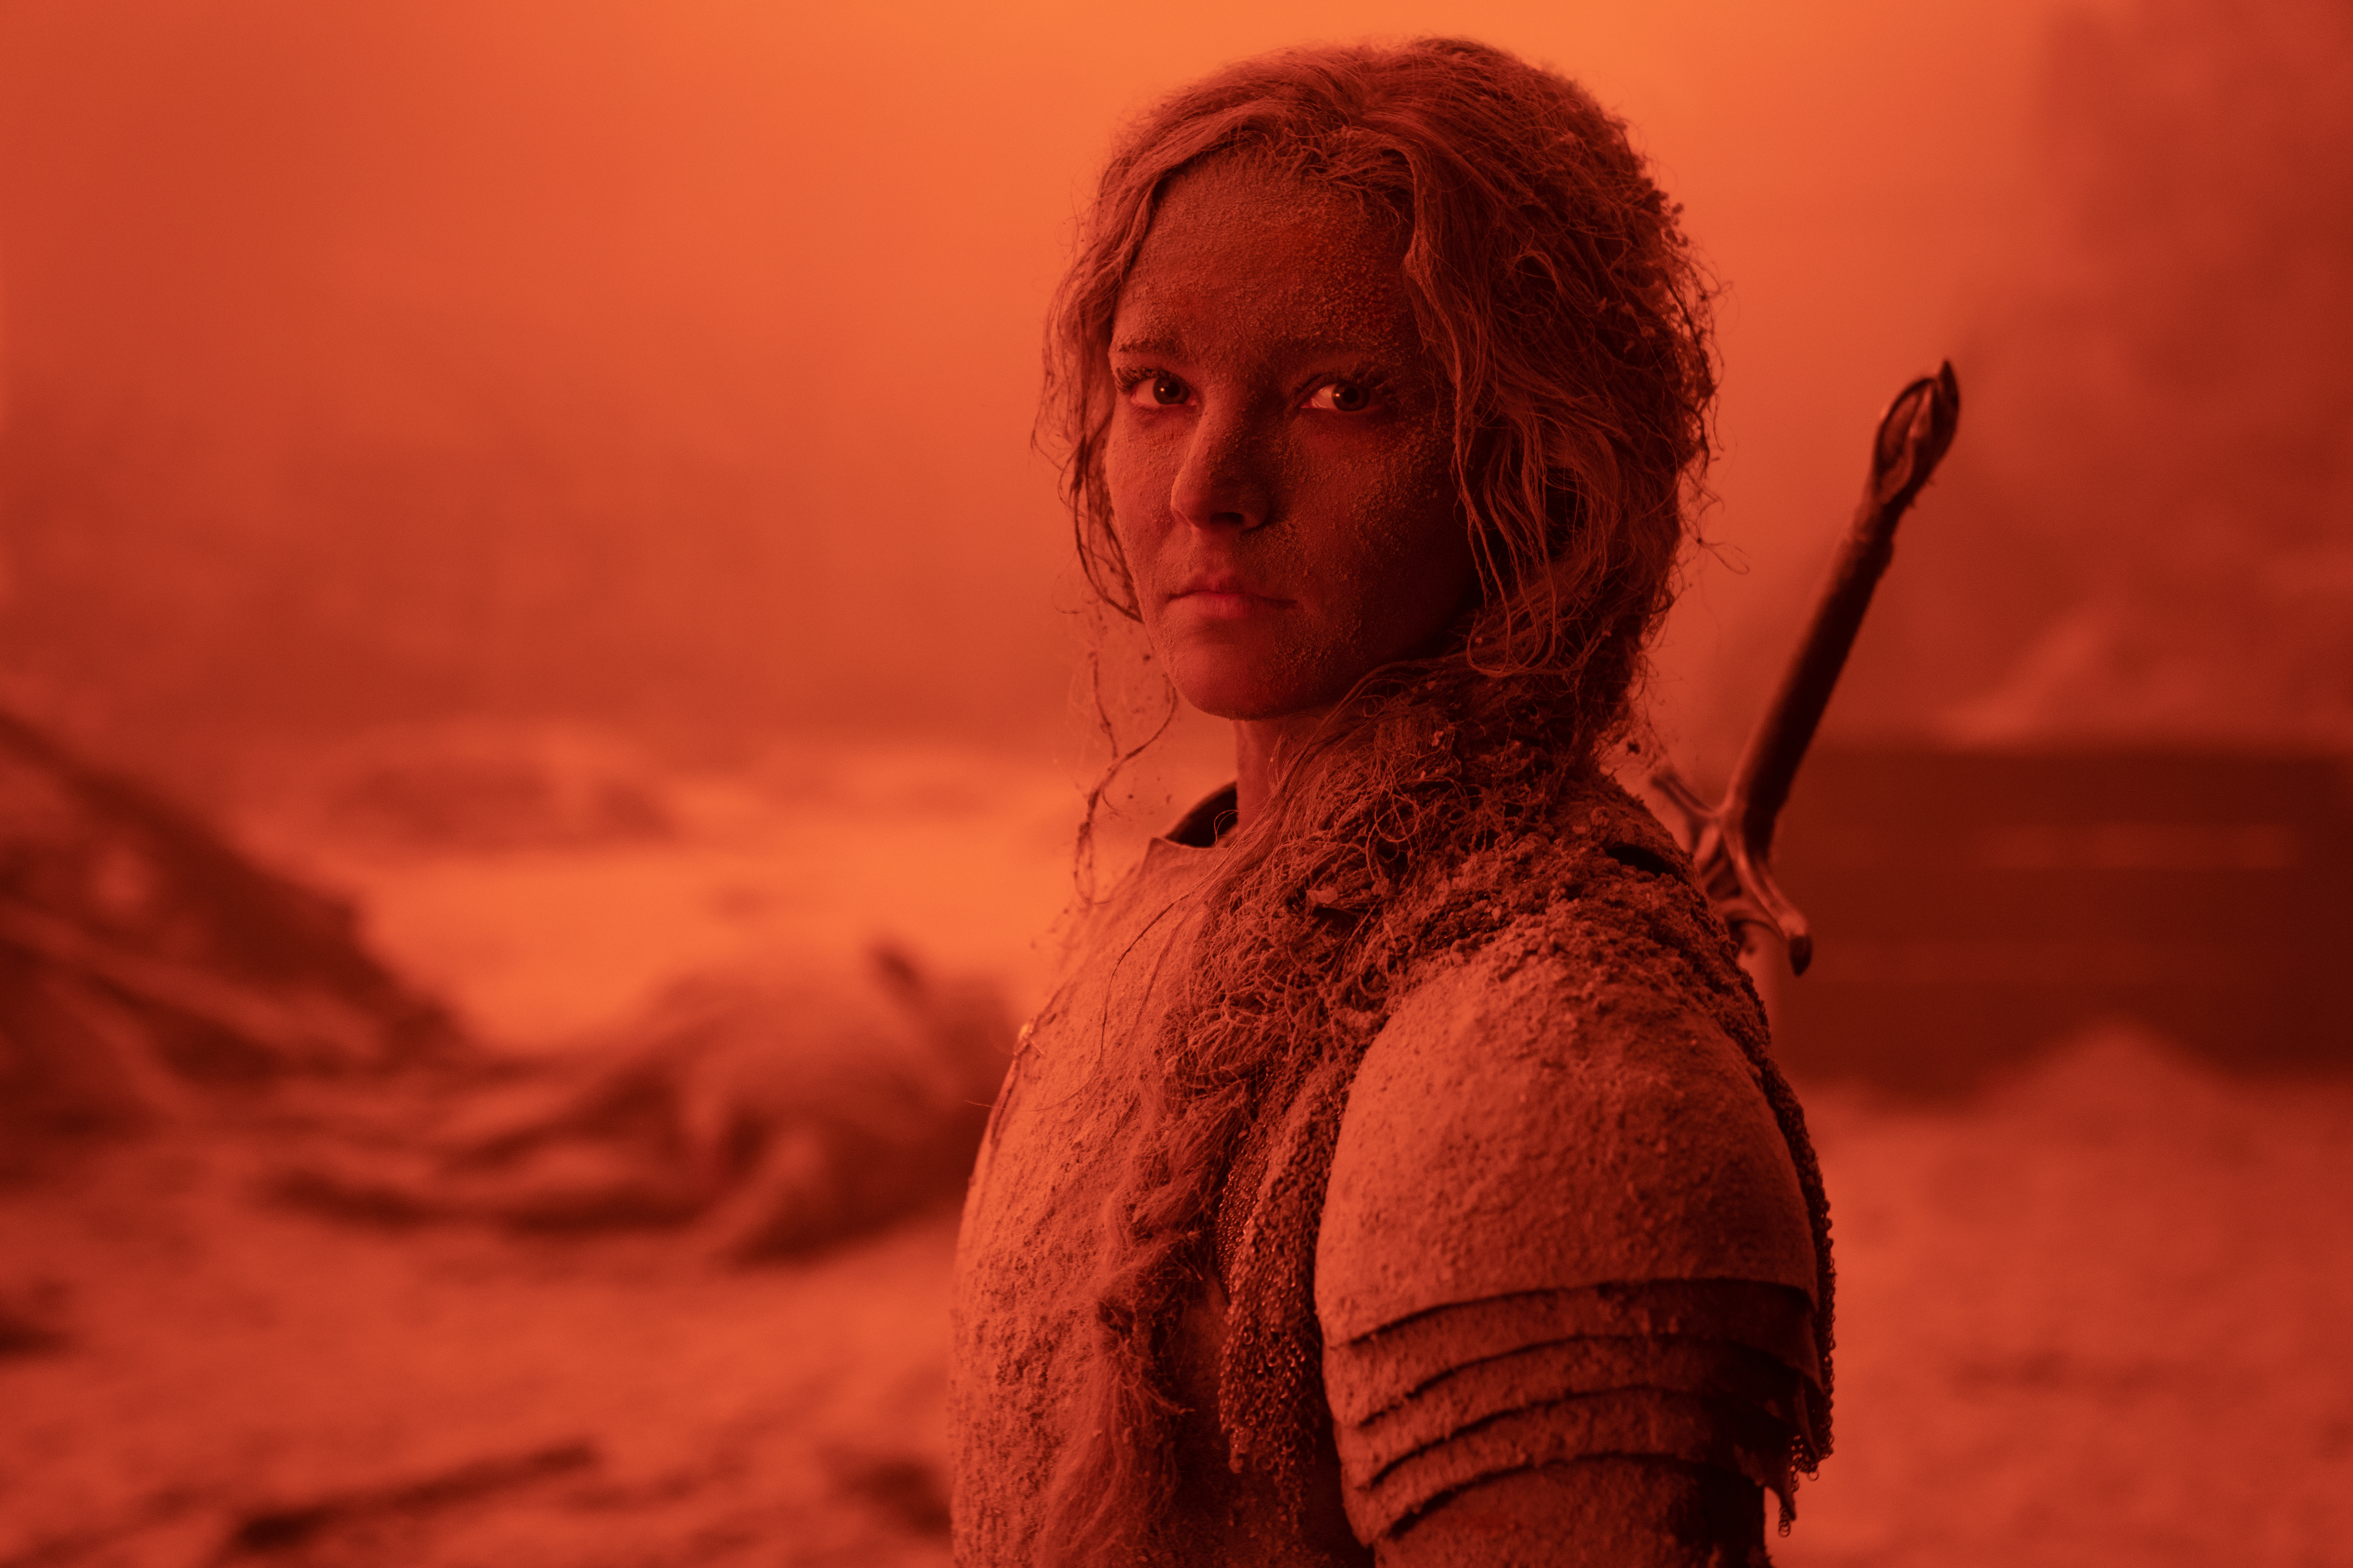 Galadriel (Morfydd Clark) stands in defiance bathed in red light in Lord of the Rings: The Rings of Power